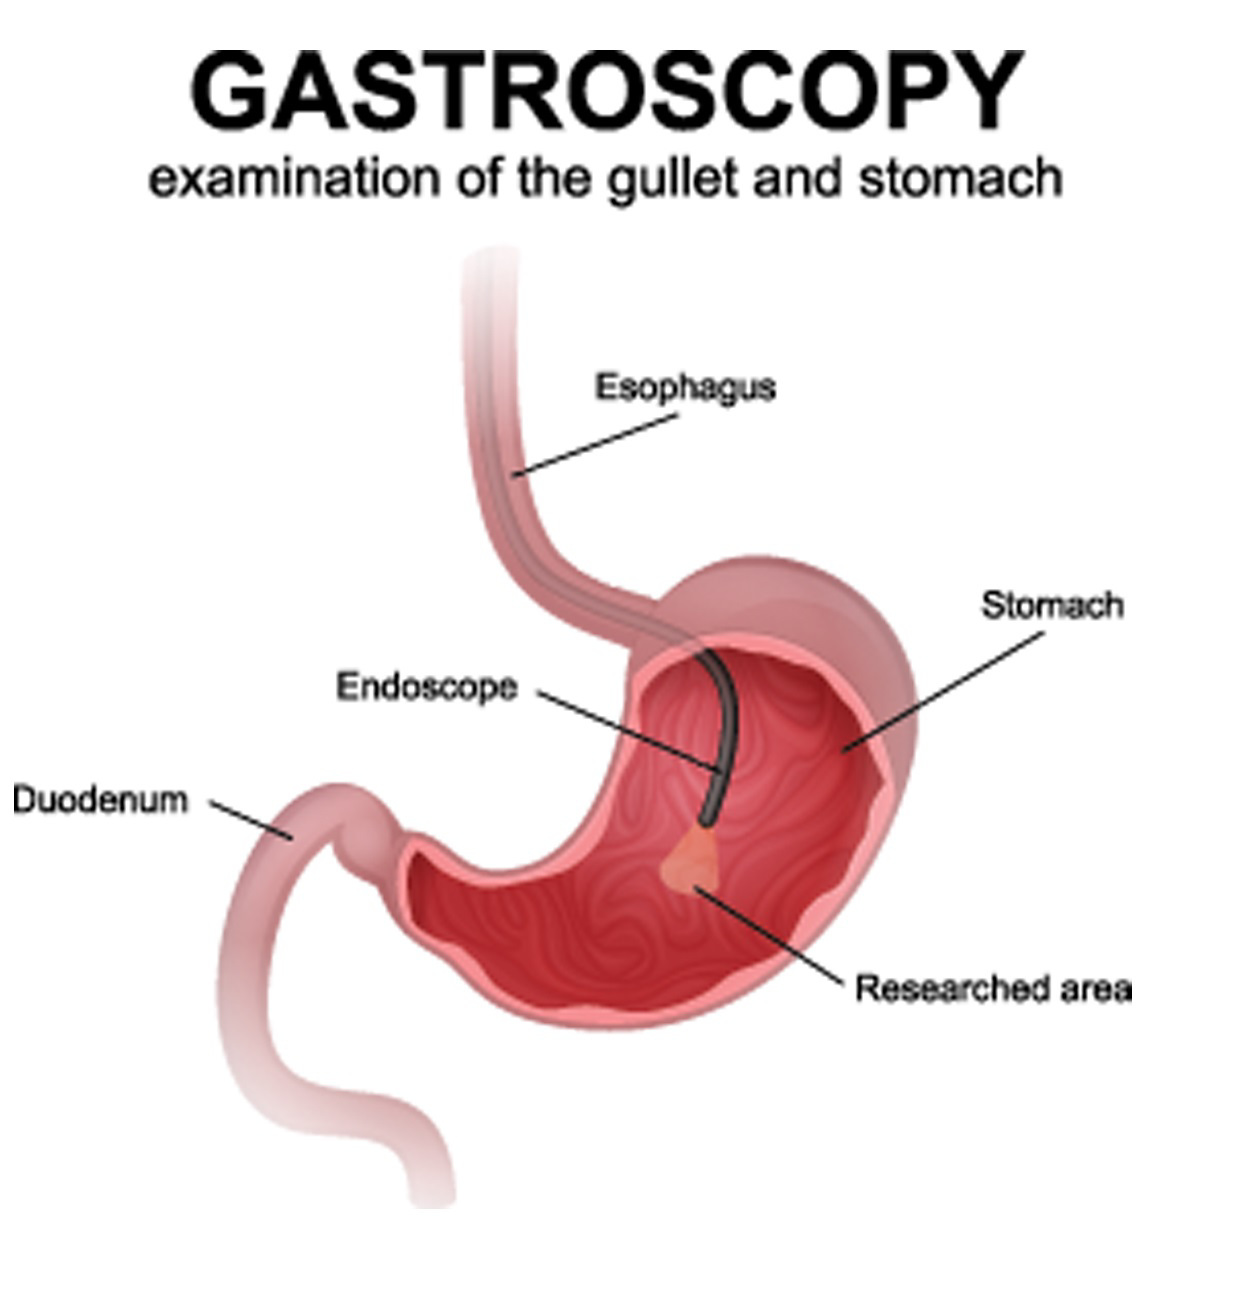 Blog - Diagnosing Gastroenterology Conditions with Imaging Studies